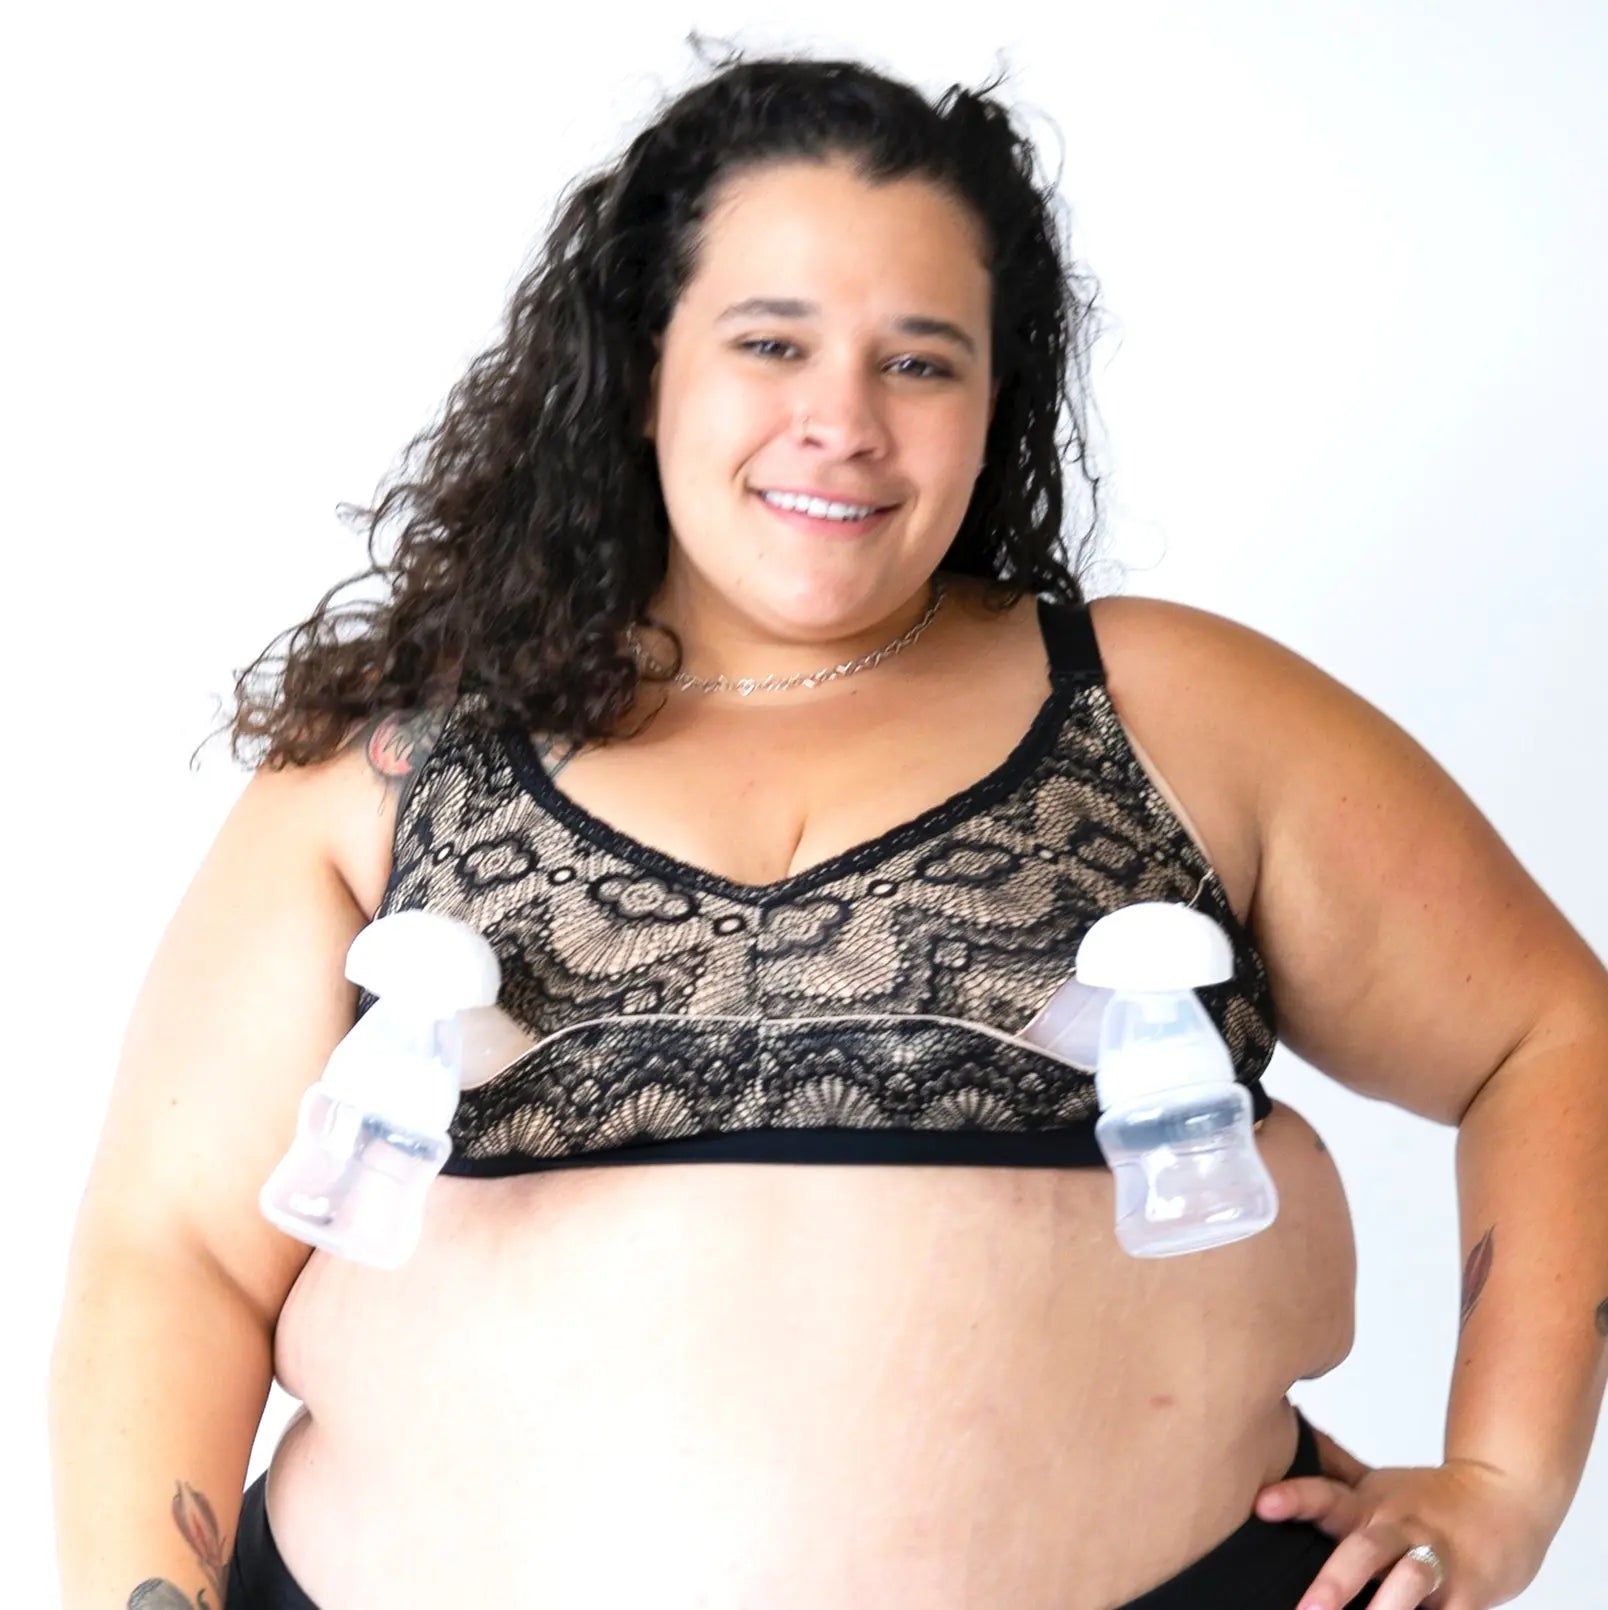 Ruby by The Dairy Fairy Nursing & Pumping Bra Review #18 